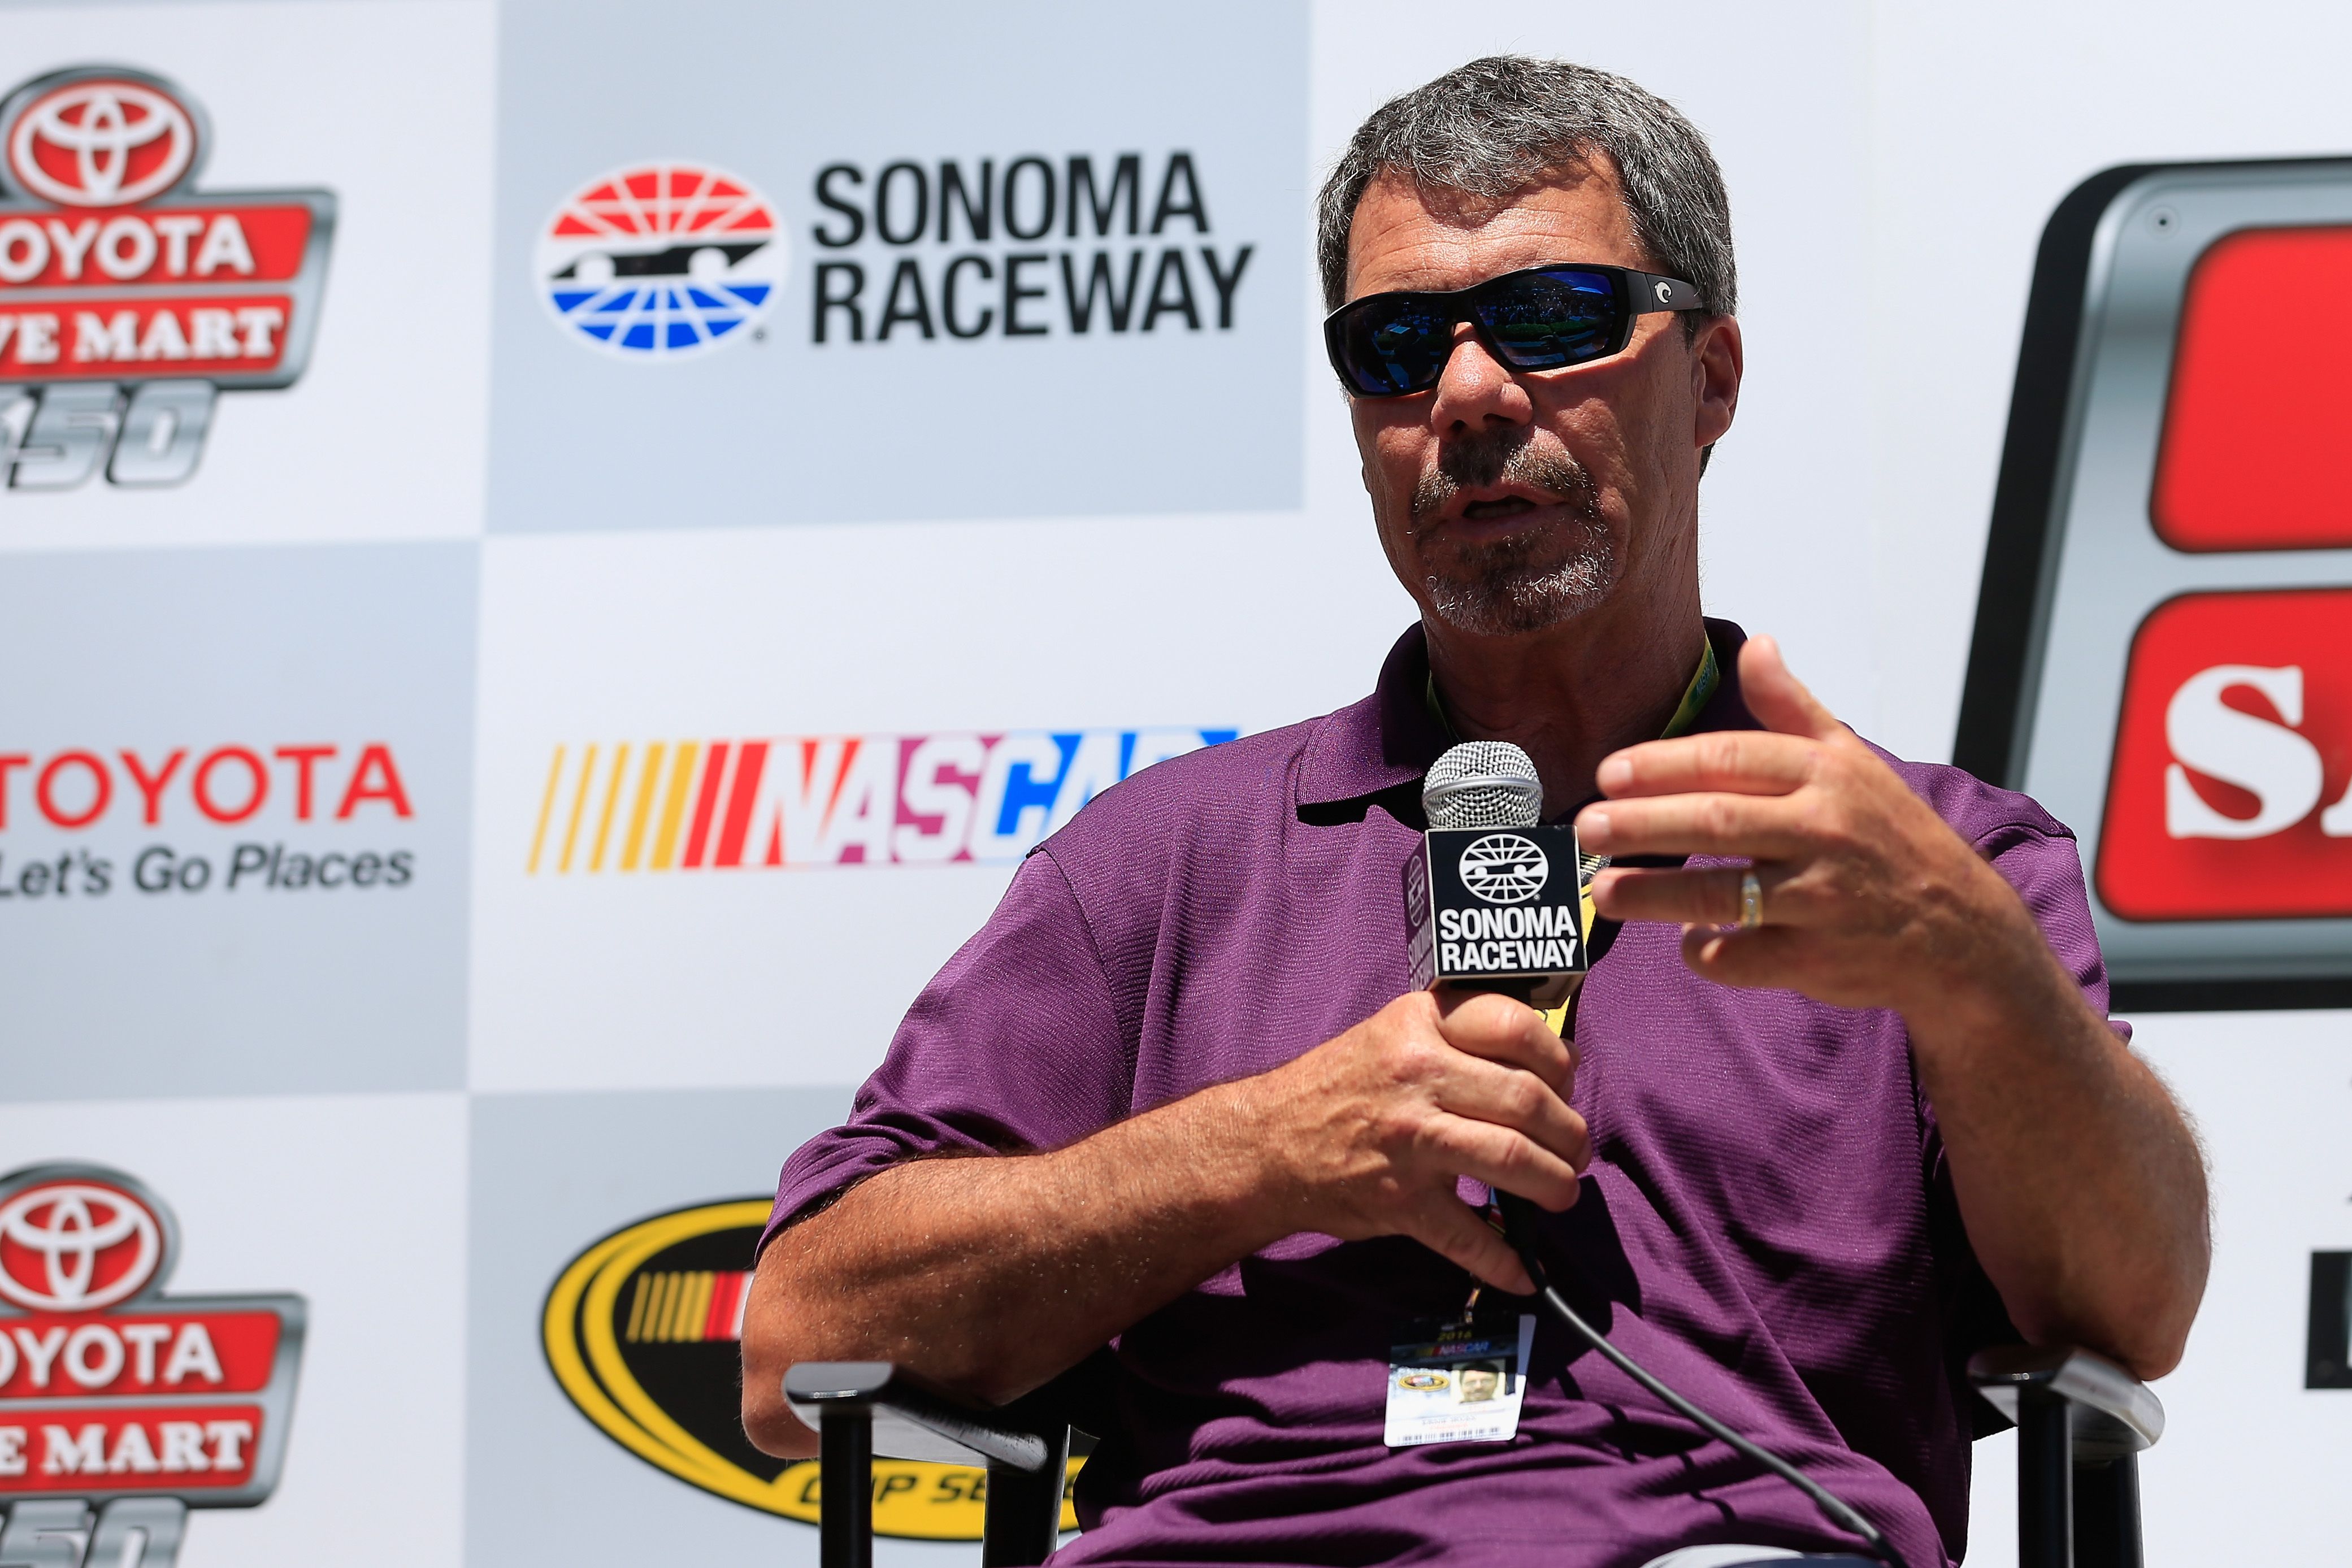 Ernie Irvan at the Sonoma Raceway Wall Of Fame after practice for the NASCAR Sprint Cup Series Toyota/Save Mart 350 at Sonoma Raceway on June 24, 2016 | Photo: Getty Images